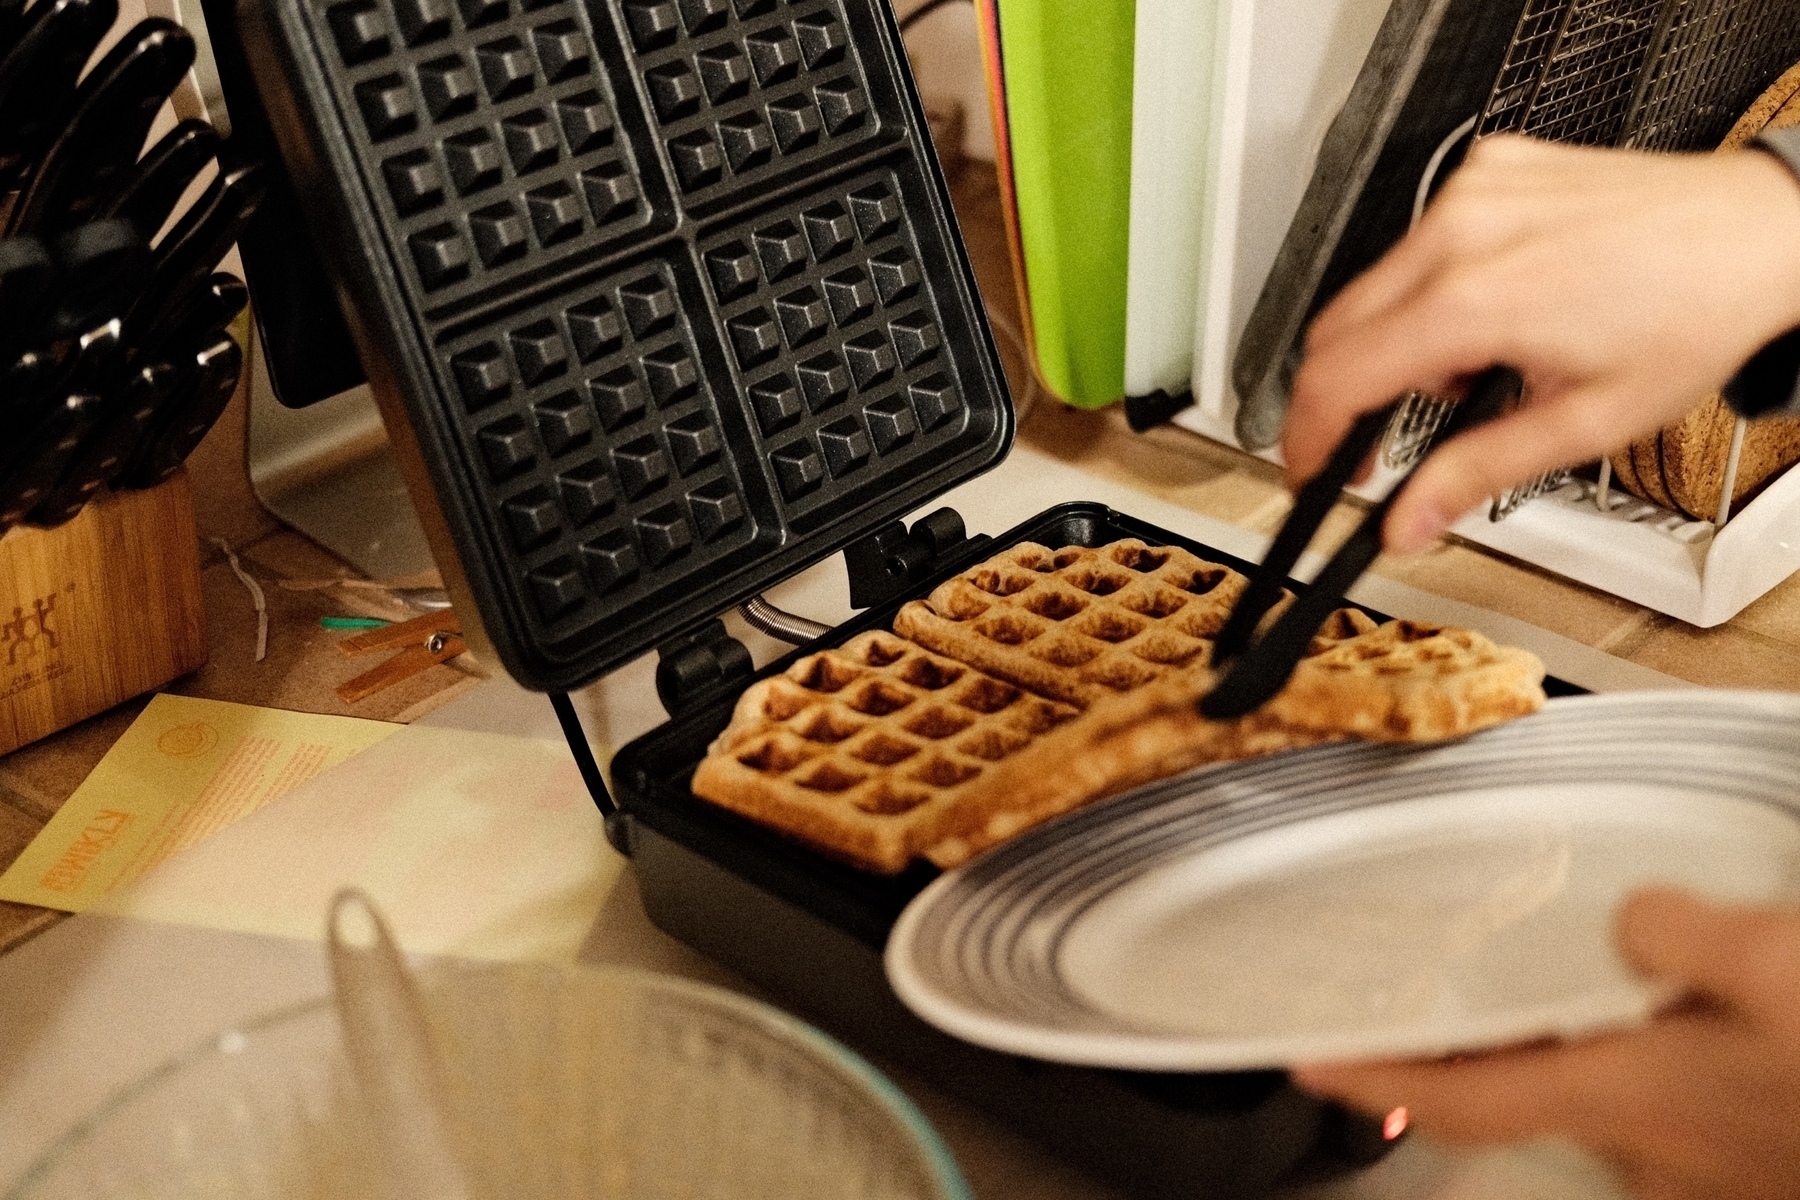 a just cooked golden brown waffle being extracted from the waffle maker